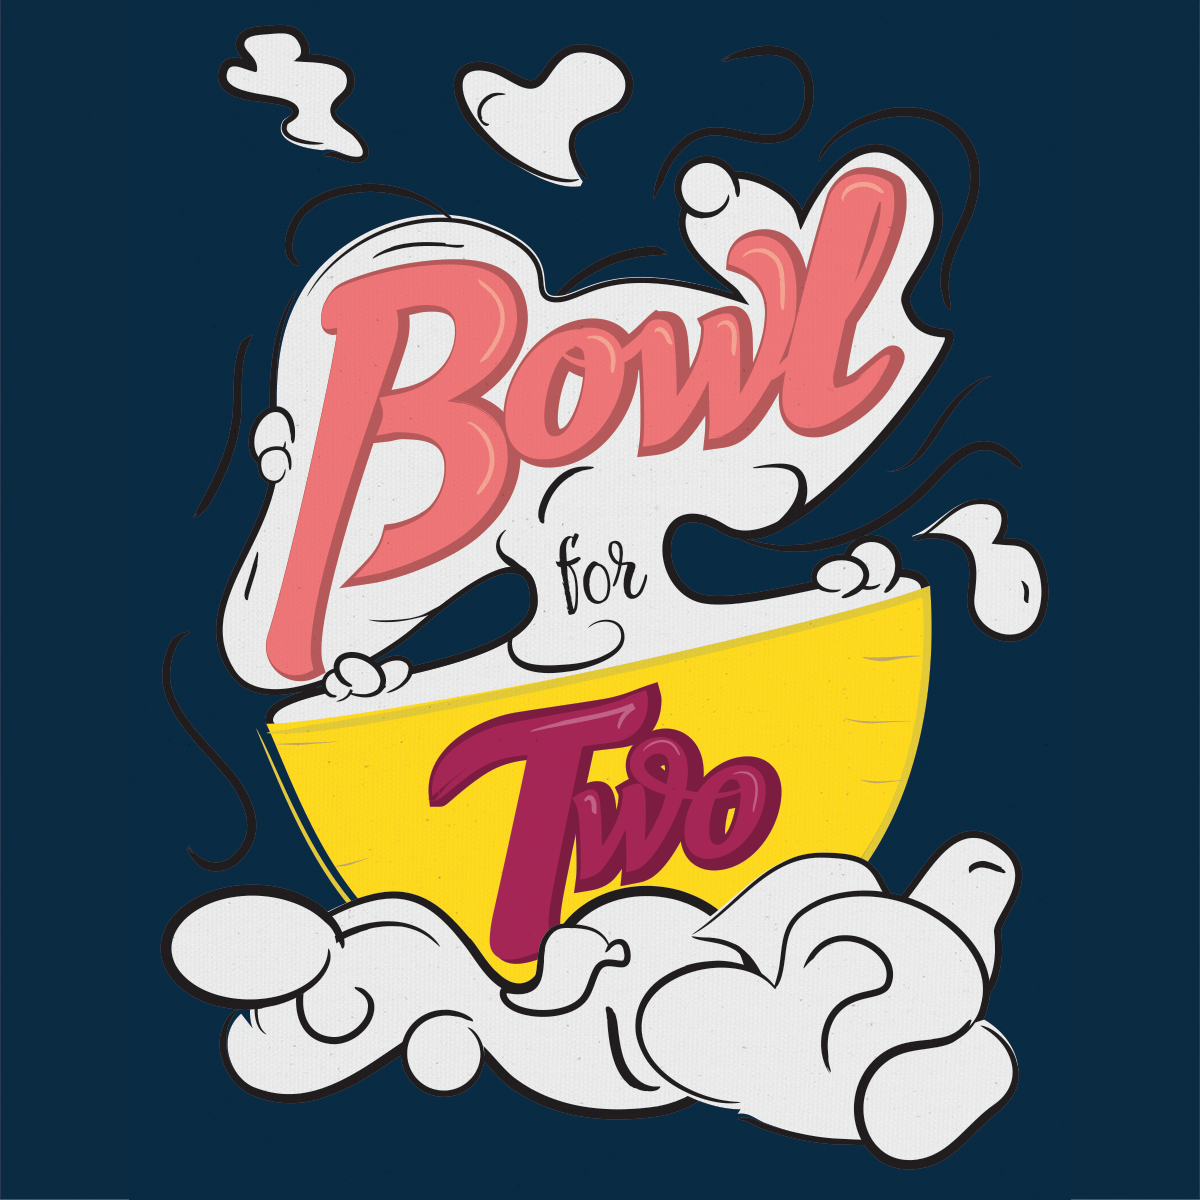 Bowl for Two